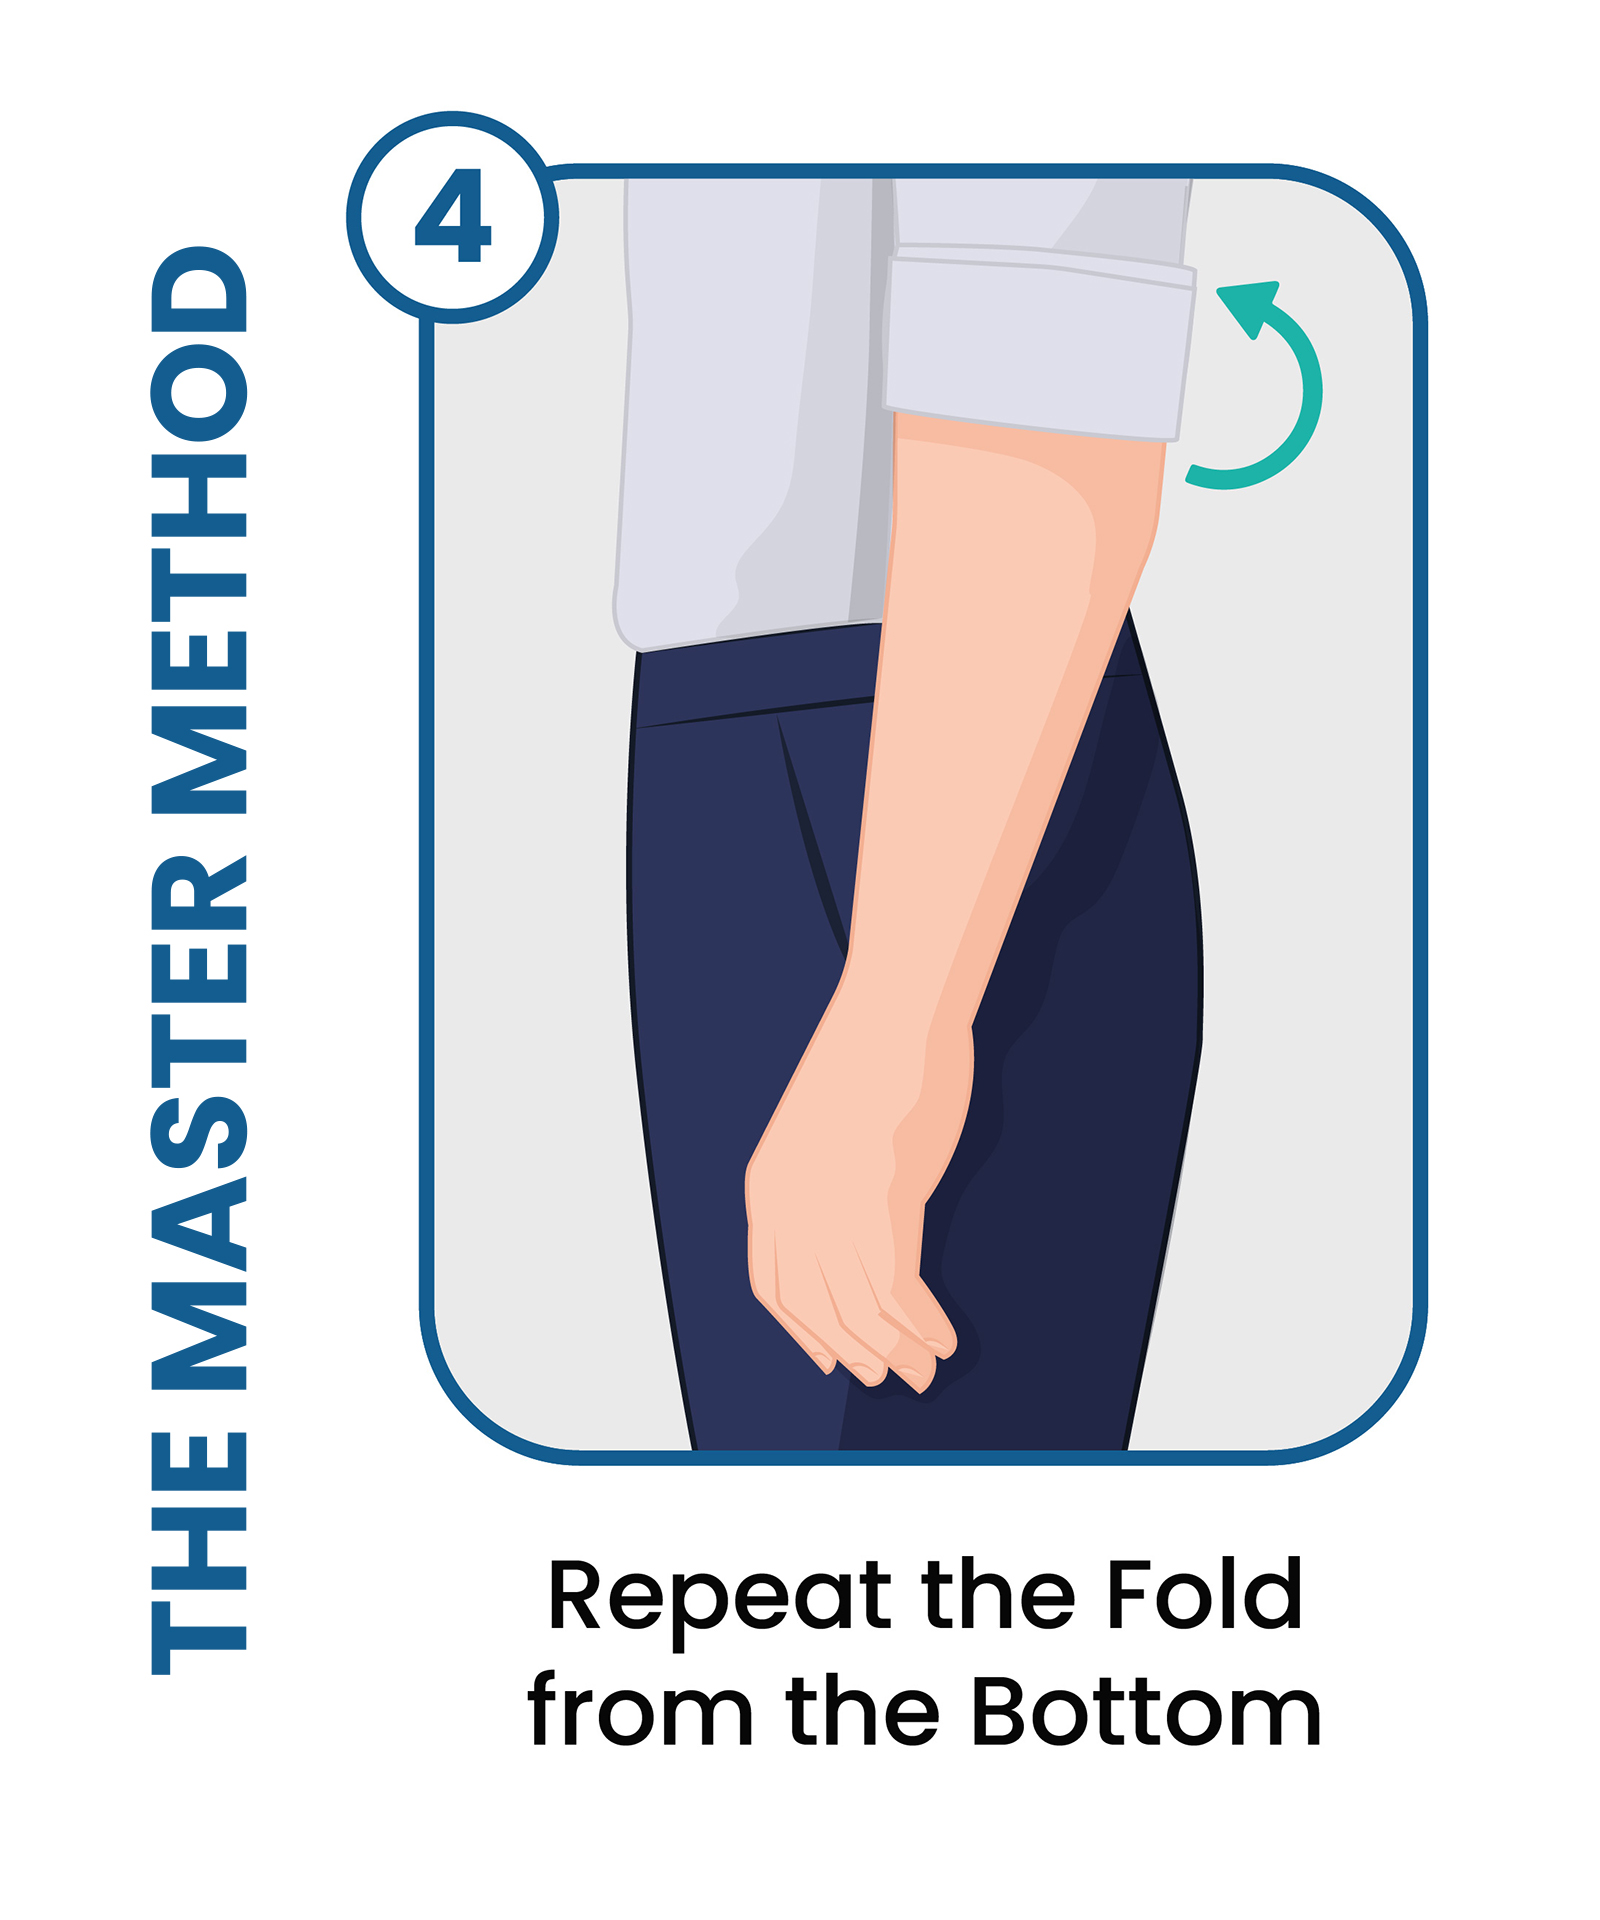 the master method: step 4 is to repeat folding from the bottom